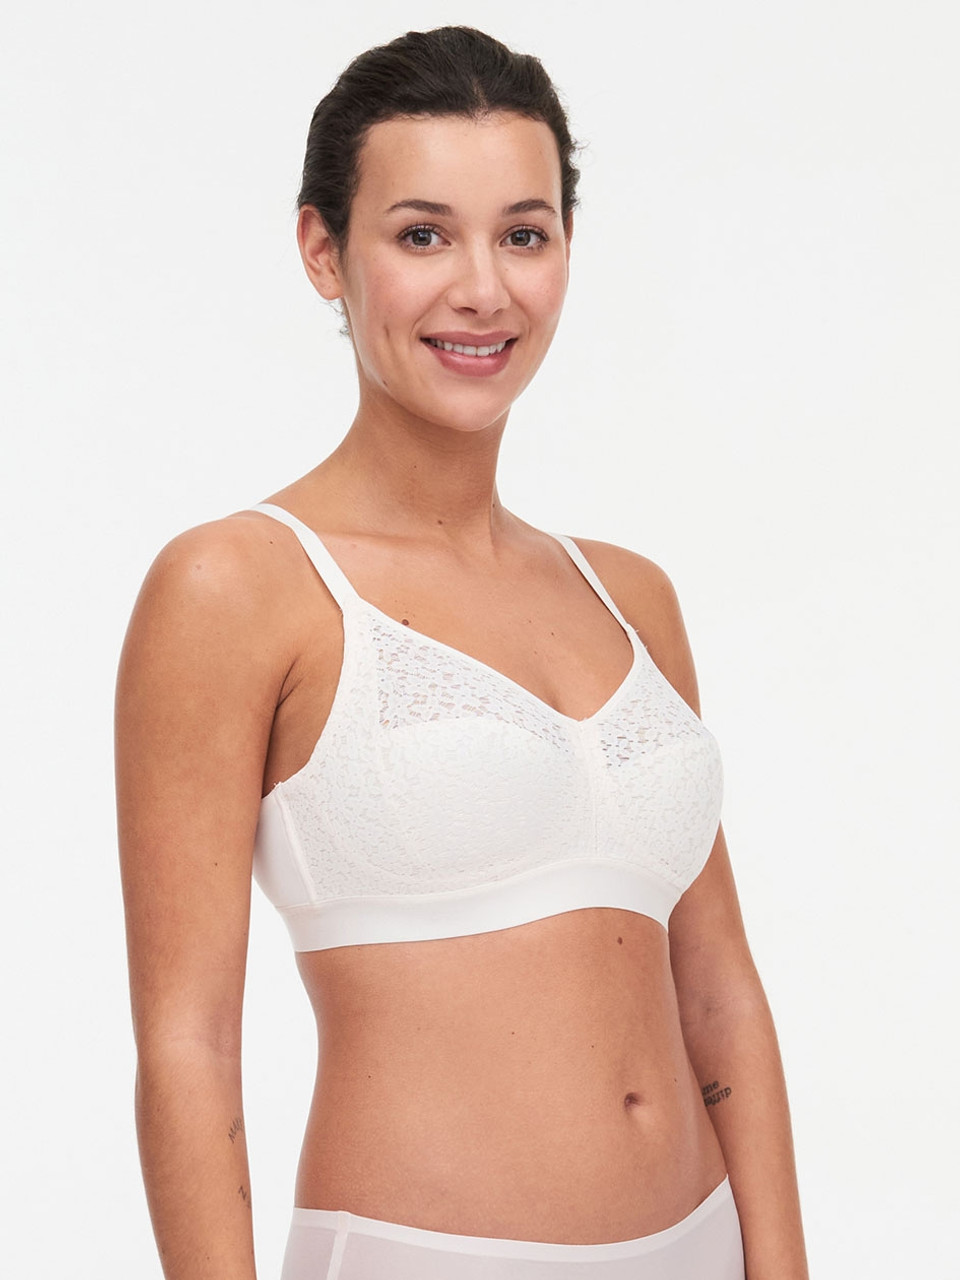 Vicanie's The Bra Fitting Specialists - The Chantelle Chic